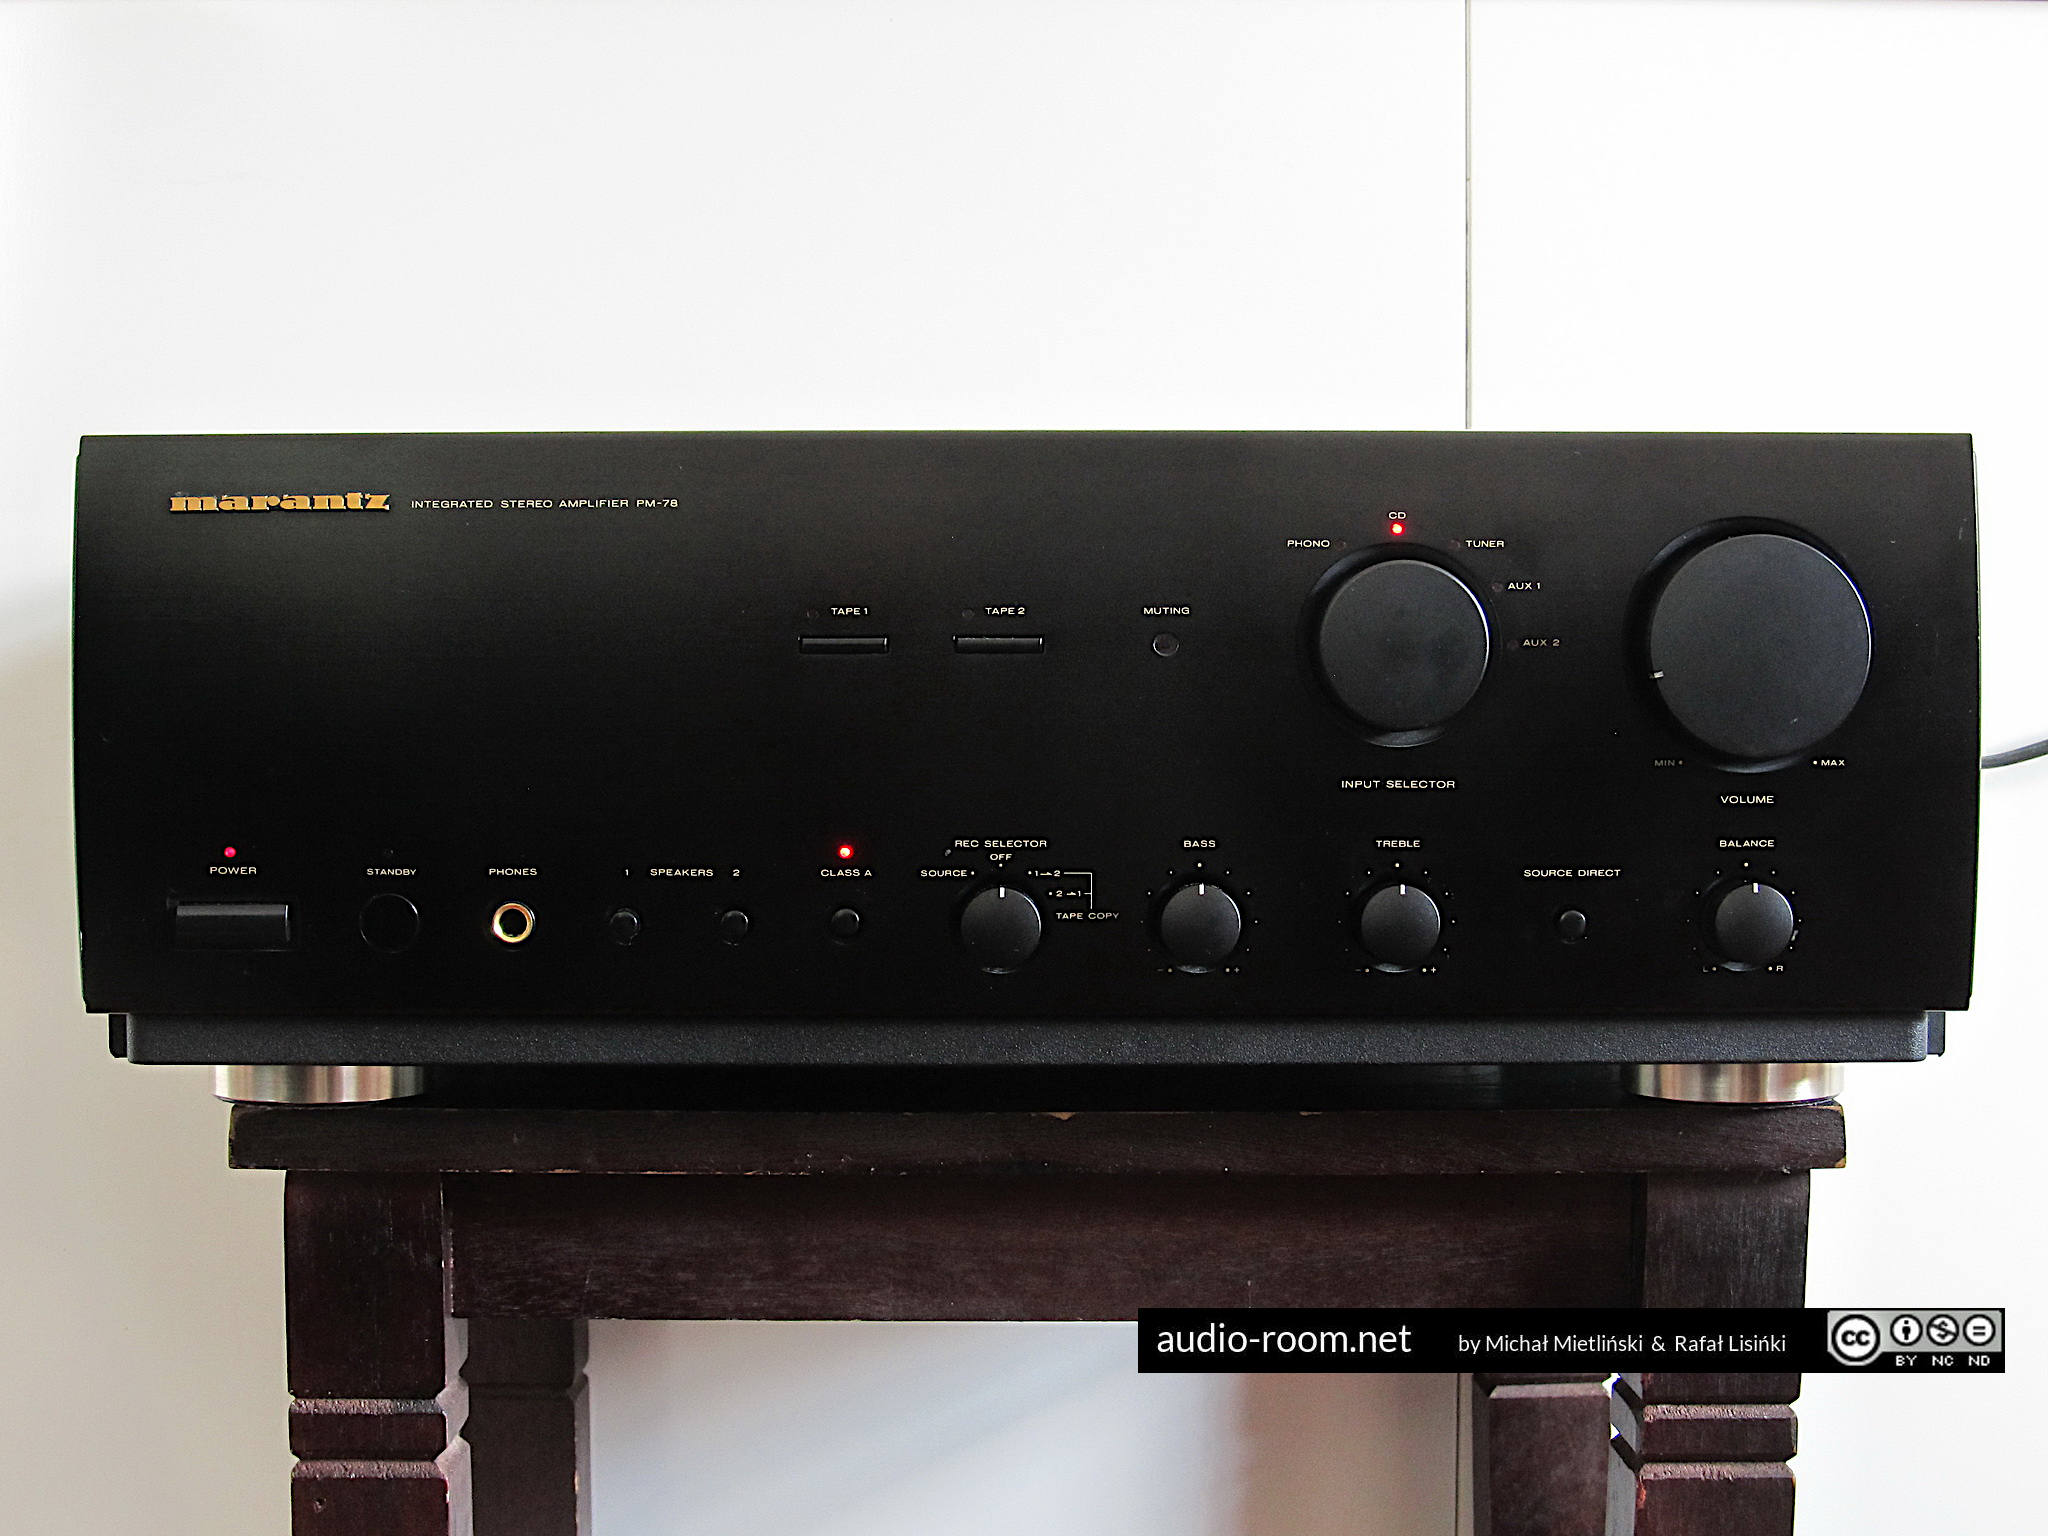 Marantz PM-78 inegrated amplifier: Ents would approve | Audio-room